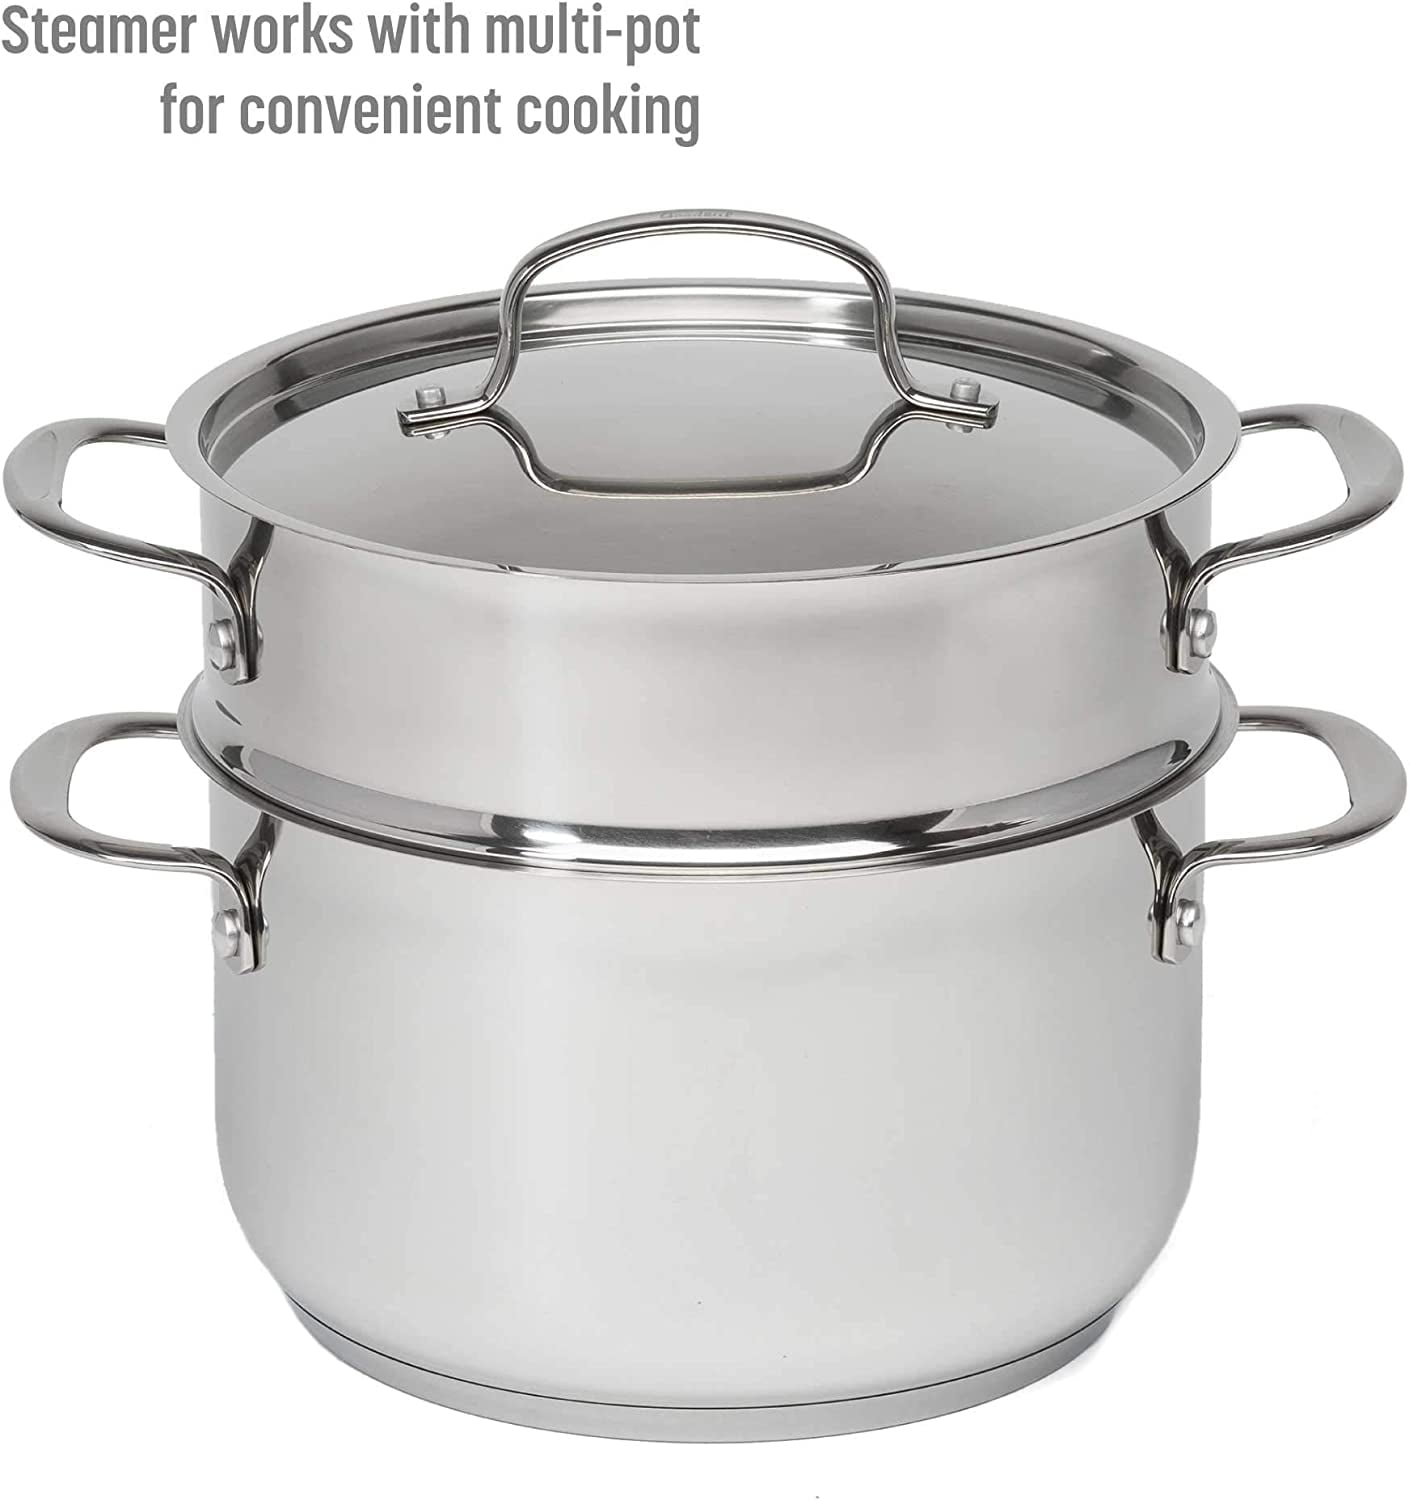 Goodful goodful 12 piece cookware set with titanium-reinforced